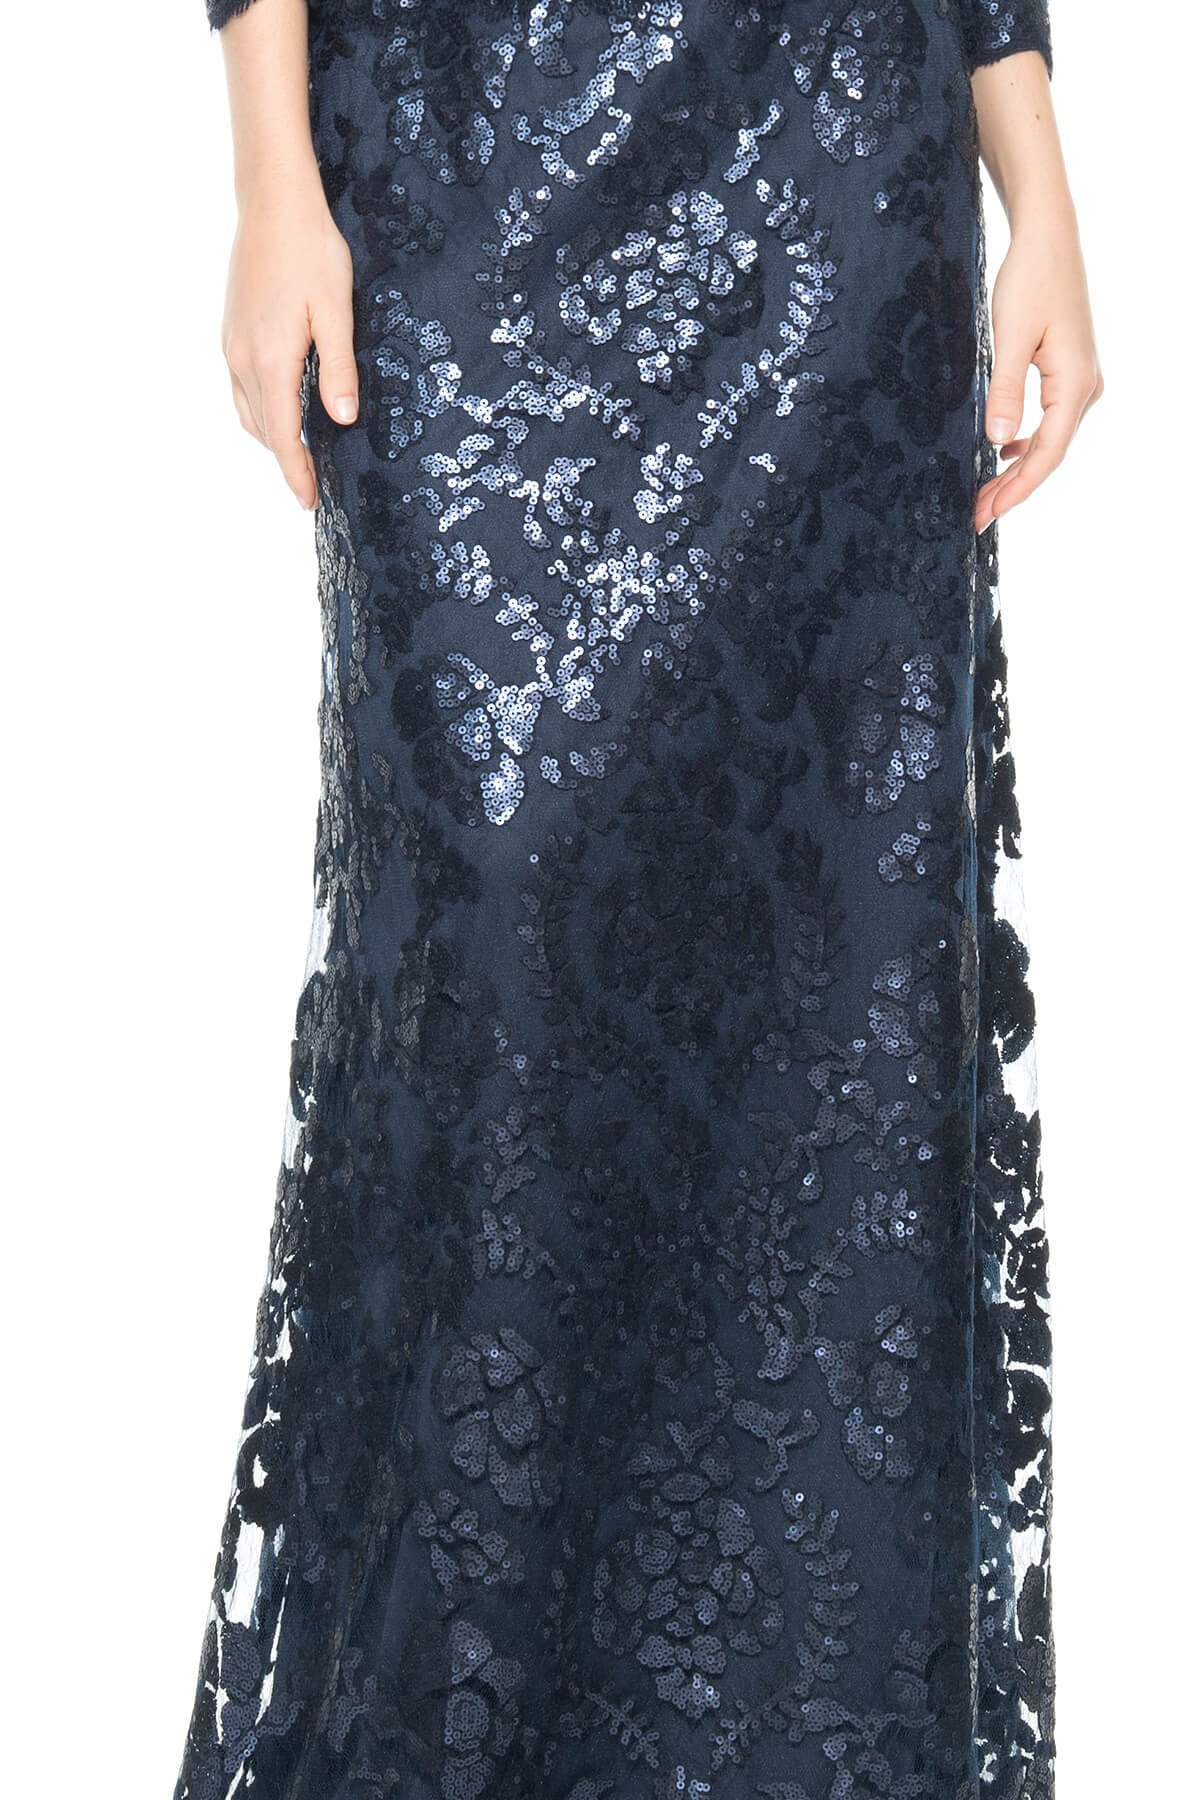 Tadashi Shoji - Paillette Embroidered Lace 3/4 Sleeve Gown - Detail